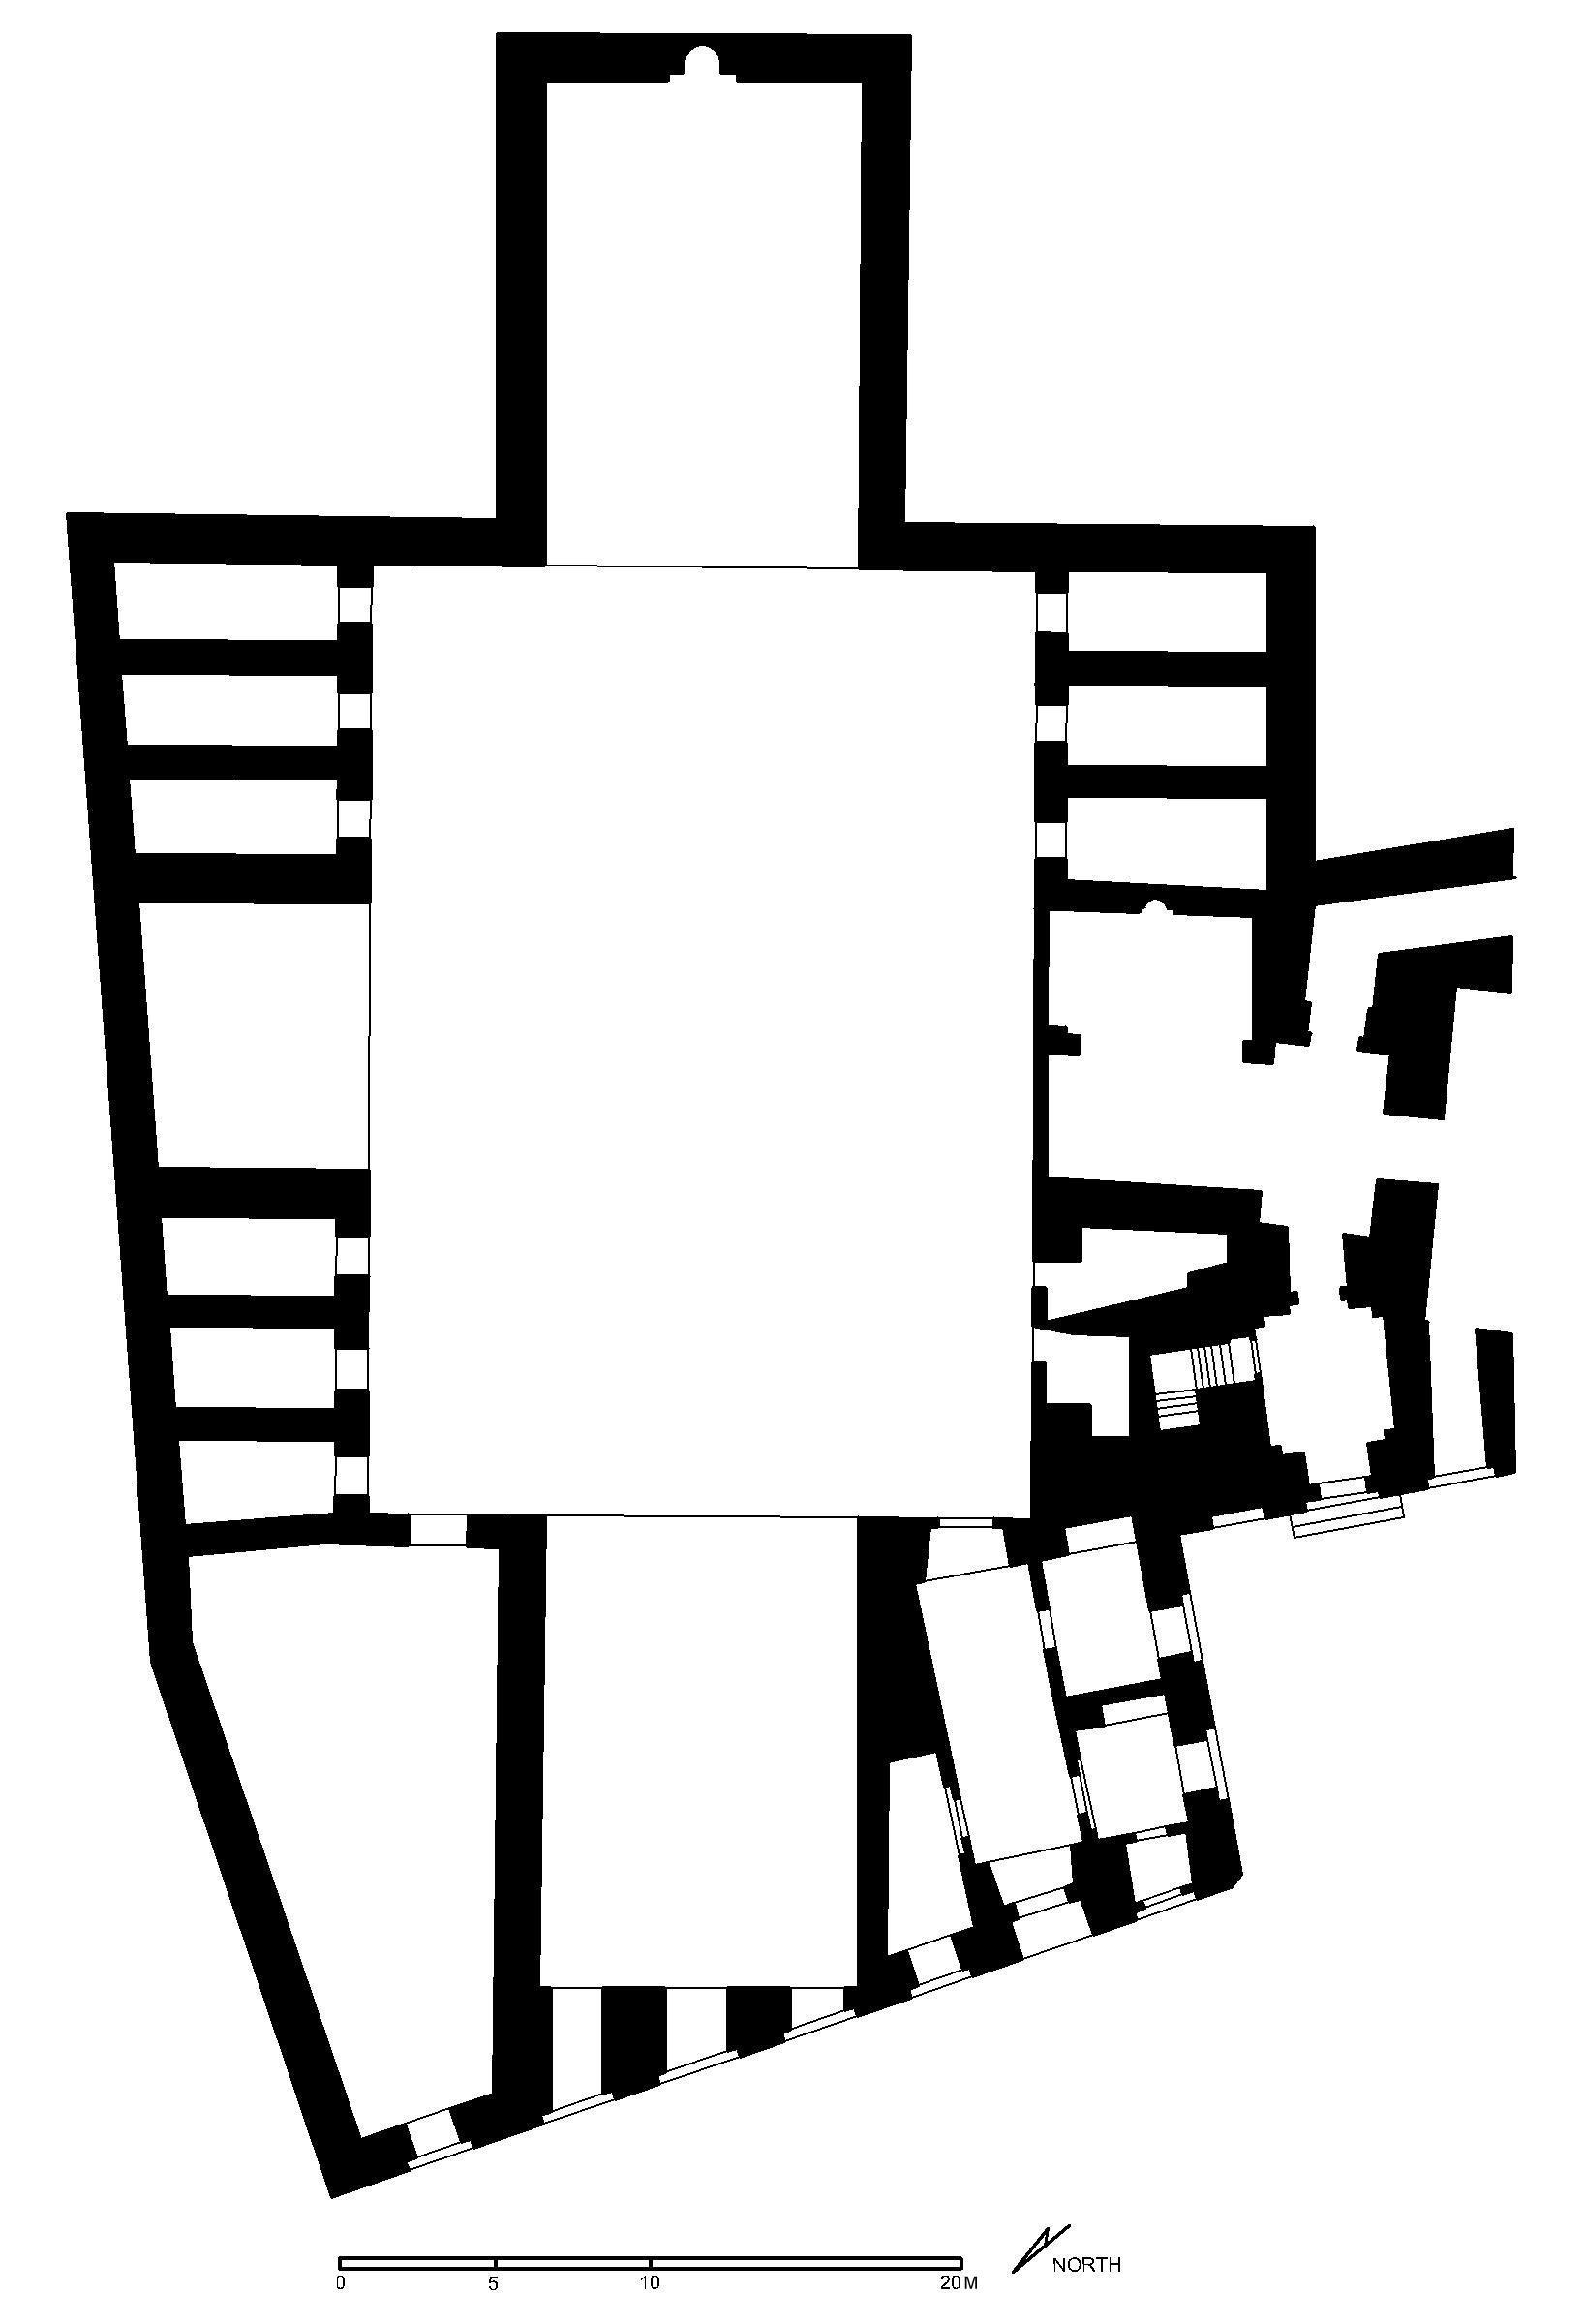 Madrasa al-Sultan al-Zahir Baybars - Reconstituted floor plan of madrasa (after Meinecke) in AutoCAD 2000 format. Click the download button to download a zipped file containing the .dwg file.